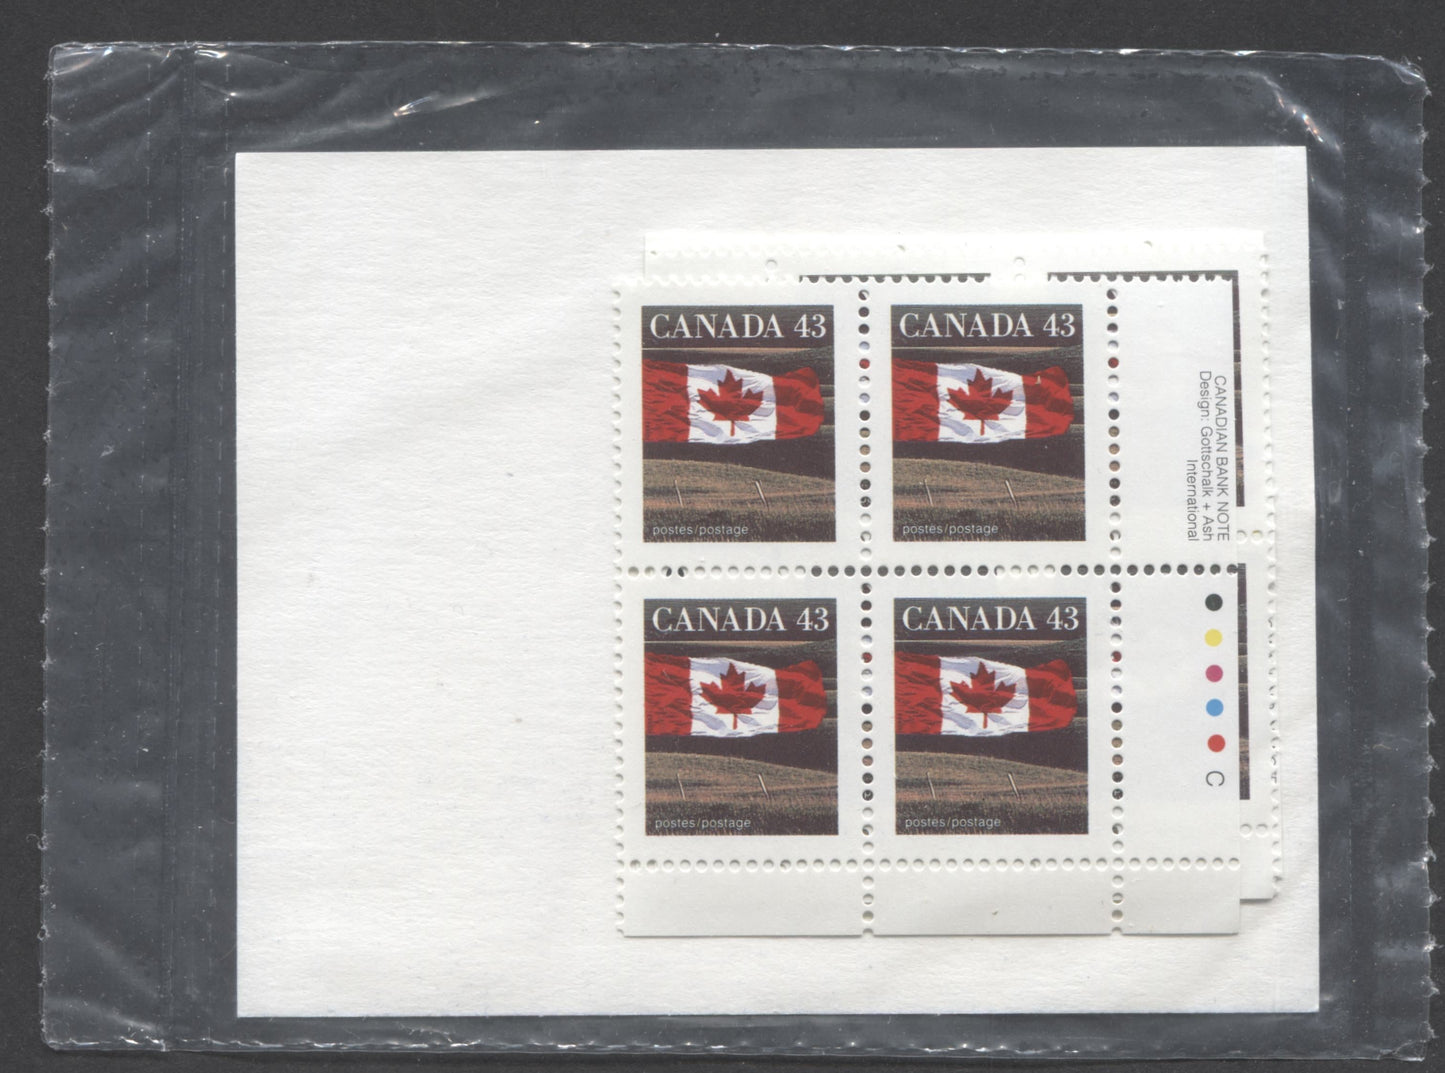 Lot 34 Canada #1359x 43c Multicoloured 1994 Domestic First-Class Rate Issue, Canada Post Sealed Pack of Inscription Blocks, CBN Printing On DF CPP Paper, With HB Type 6A Insert Card, VFNH, Unitrade Cat. $20